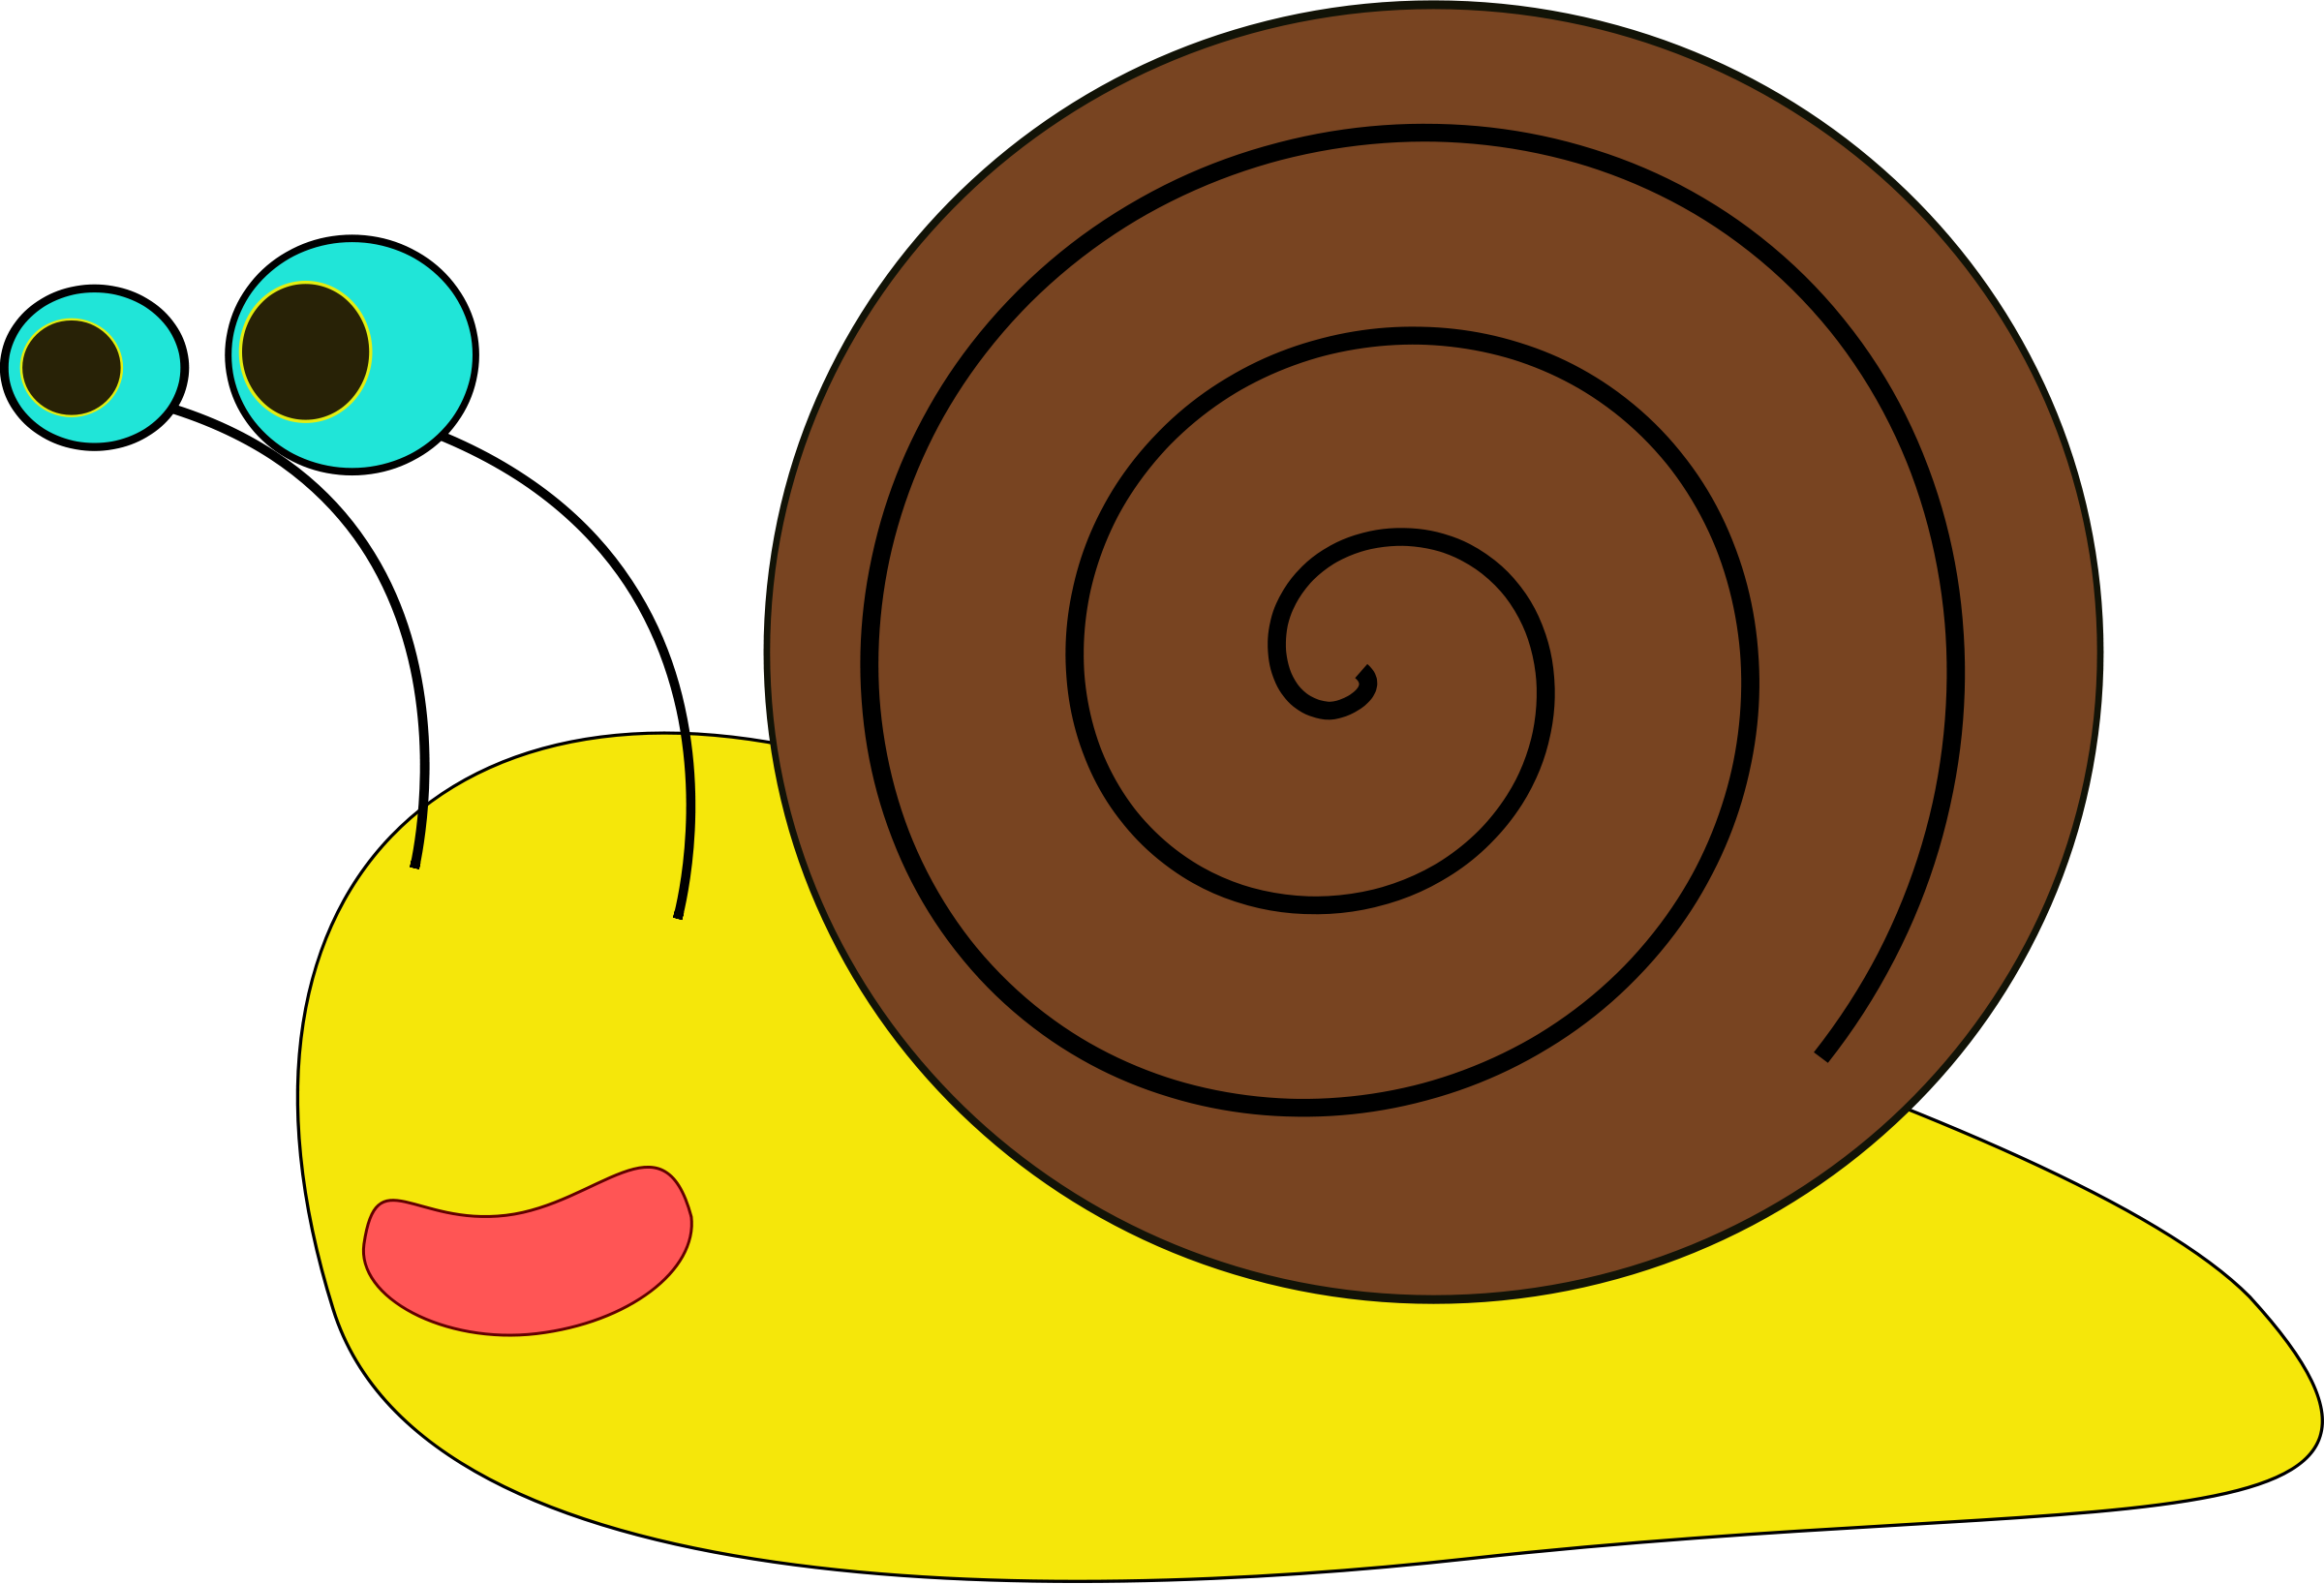 Turbo The Snail Images Clipart